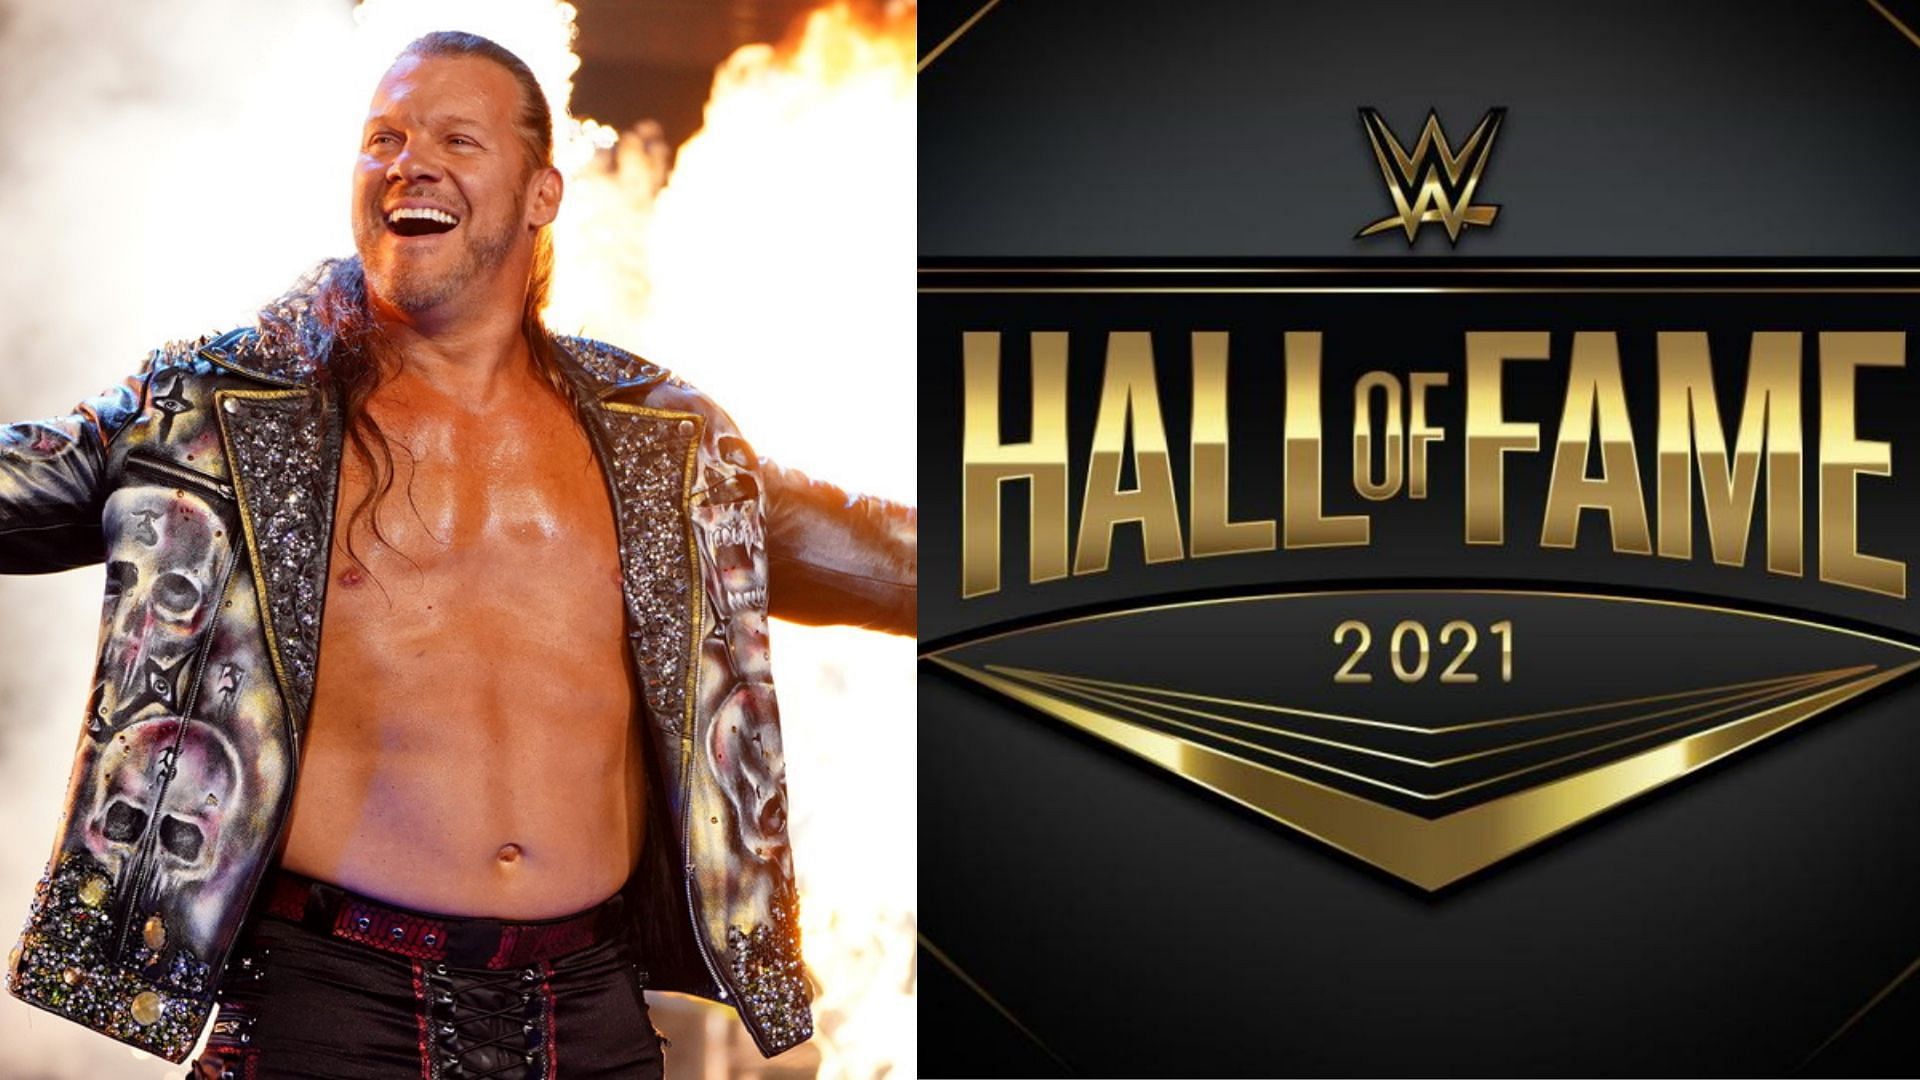 Chris Jericho could potentially be a future WWE Hall of Famer